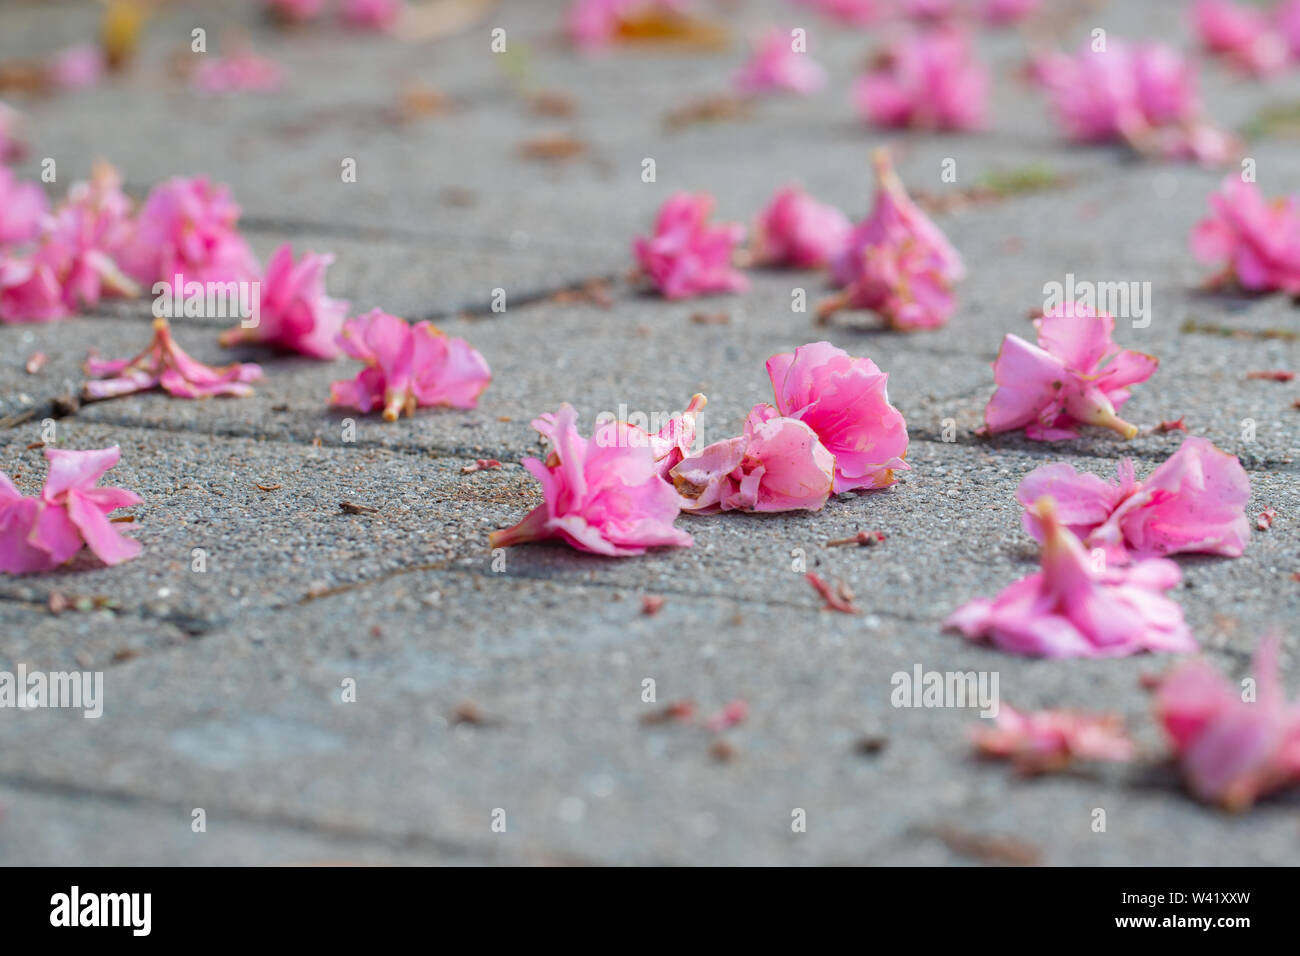 Oleander flowers littering a walkway path at a park Selected focus Stock Photo